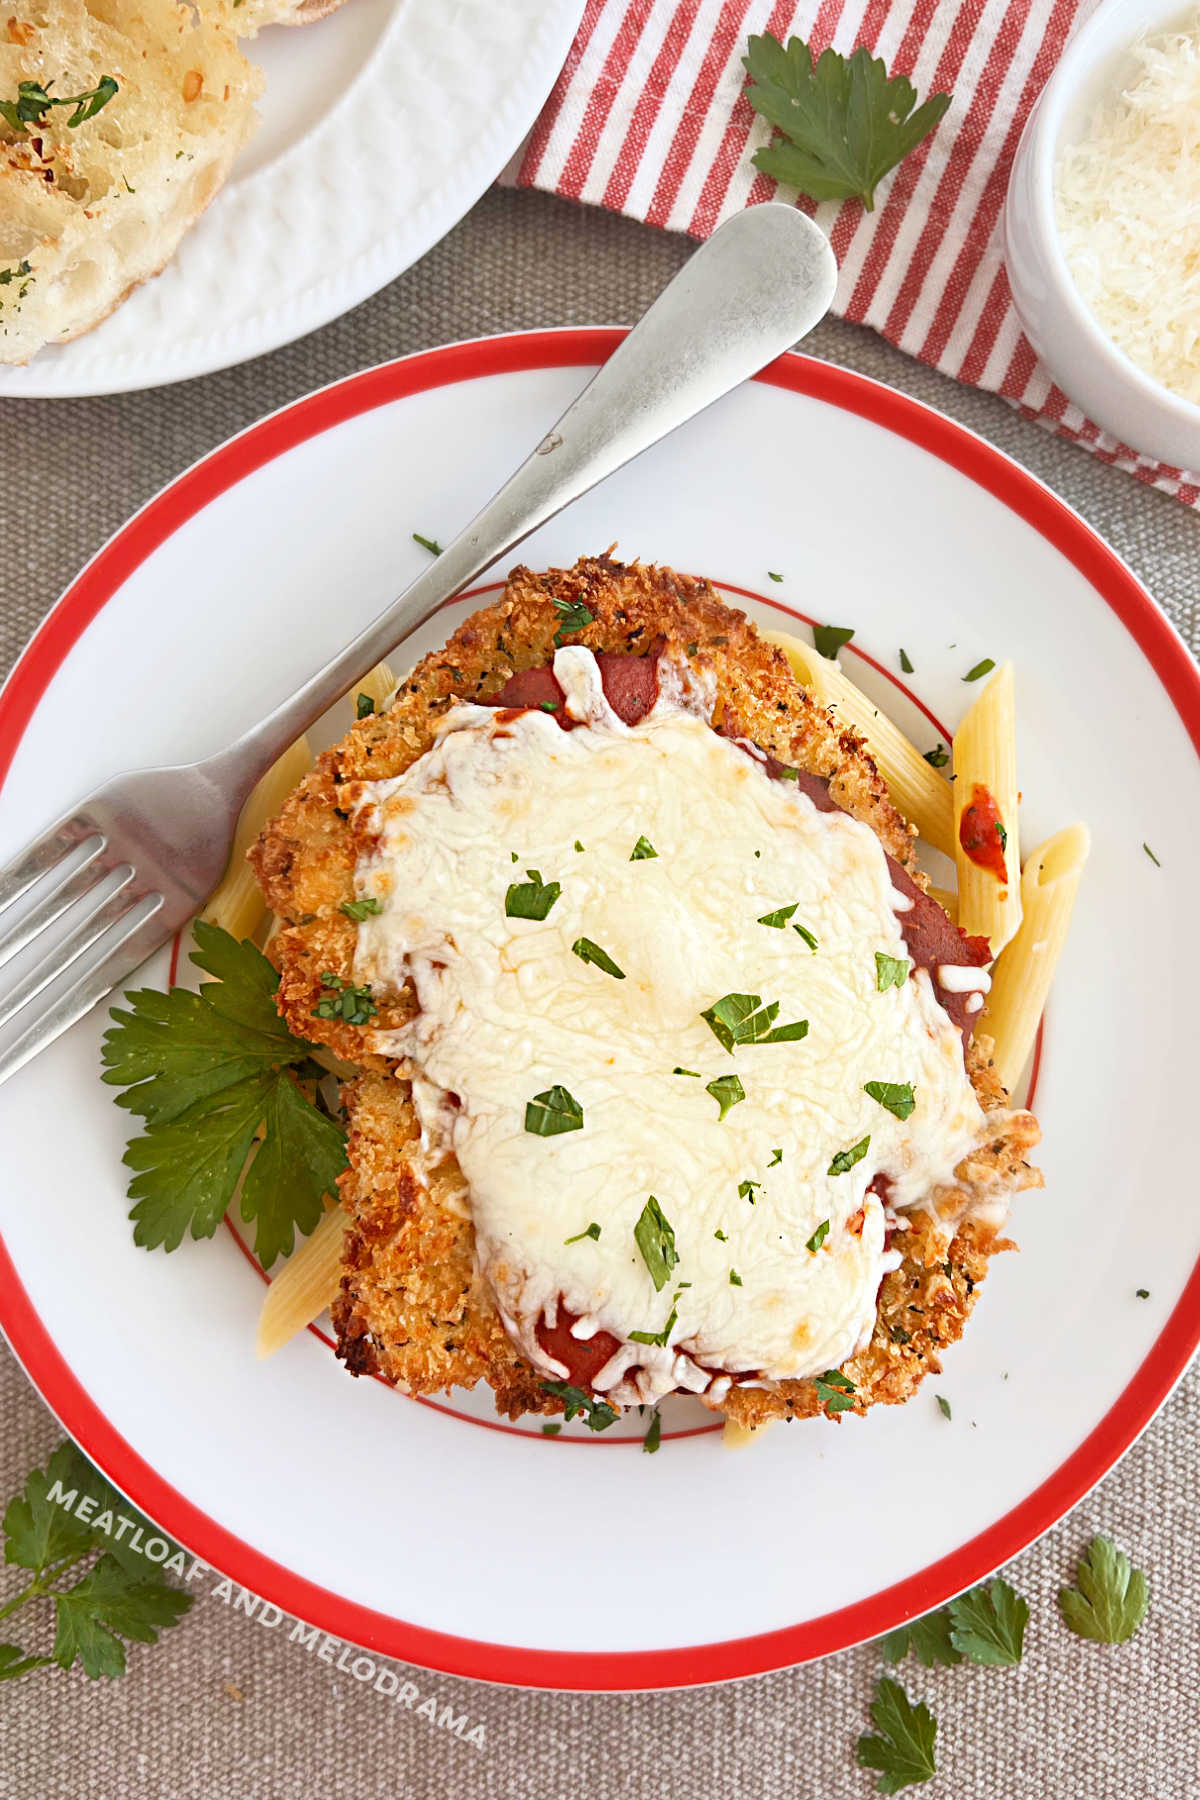 panko coated baked chicken Parmesan with melted mozzarella cheese over penne pasta